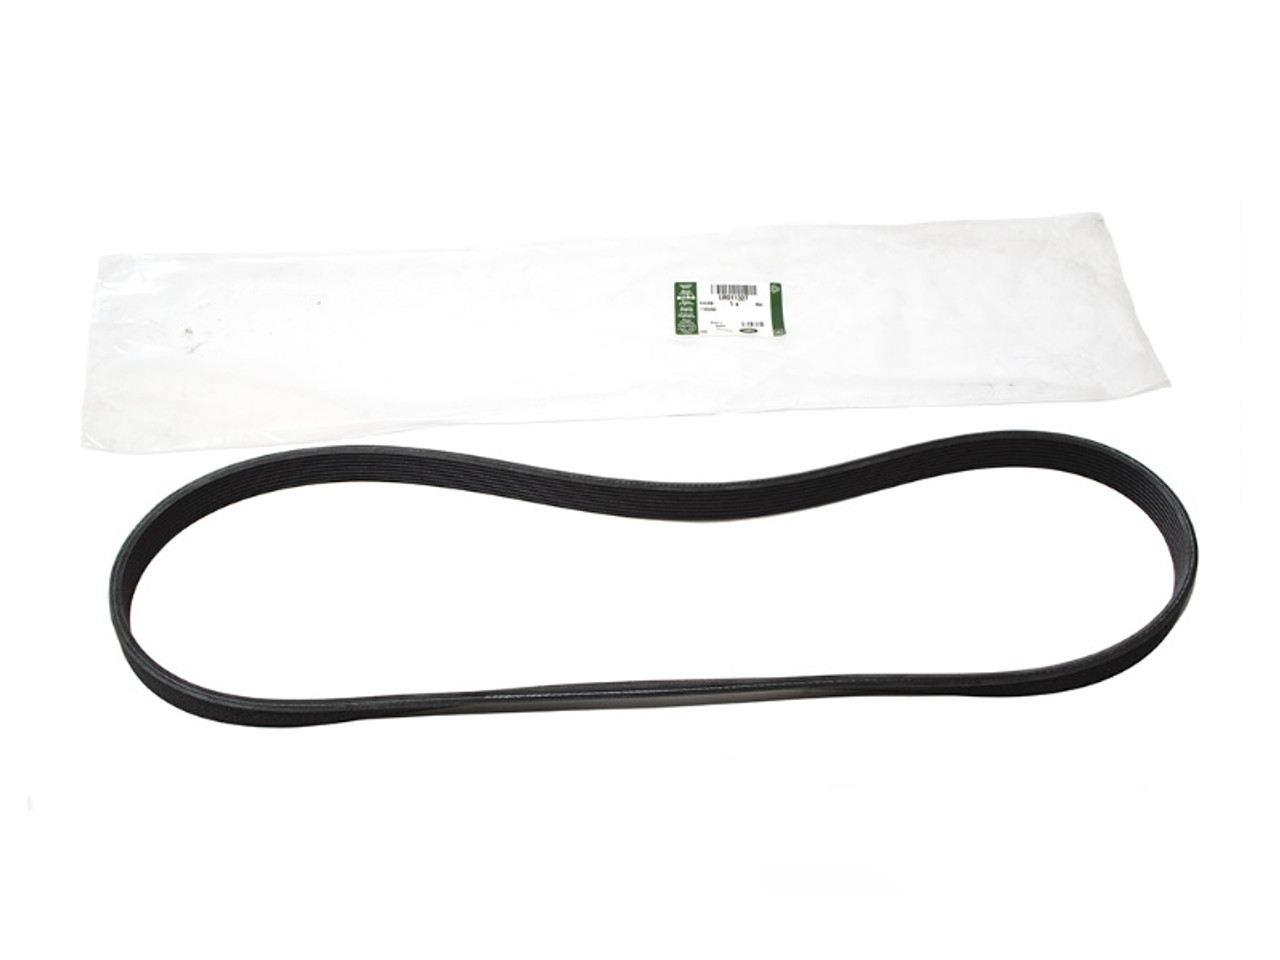 Genuine 5.0 V8 and 3.0 V6 Petrol Secondary Supercharger Auxiliary Belt - LR011327